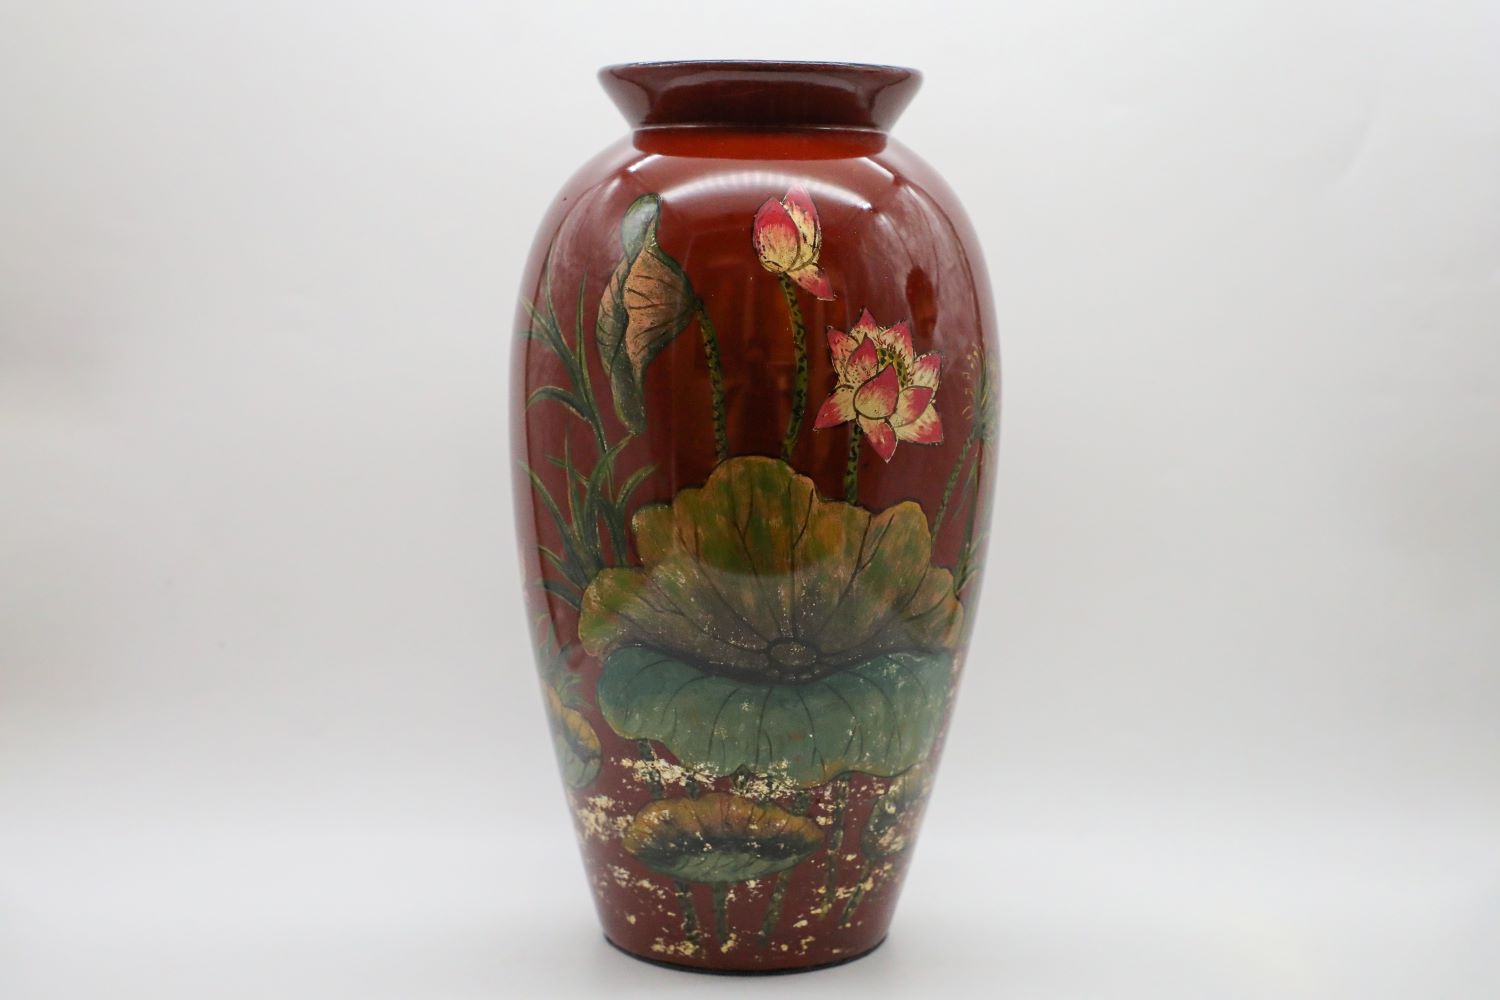 Vase of Early Dew 05 - Vietnamese Ceramic Vase by Artist Dinh Thi Thanh